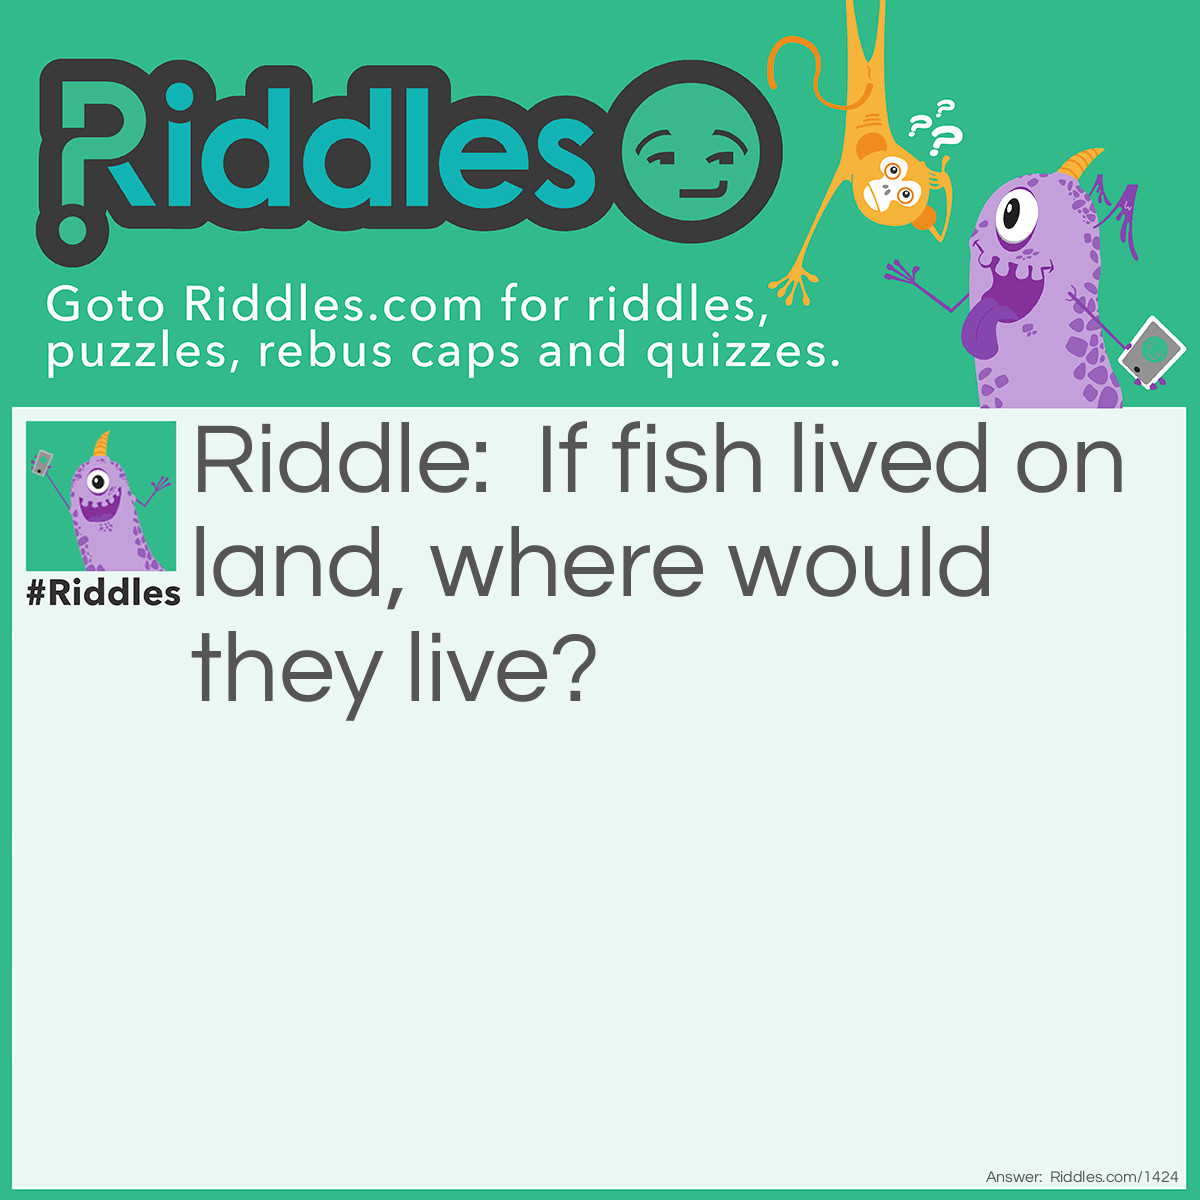 Riddle: If fish lived on land, where would they live? Answer: In Finland.